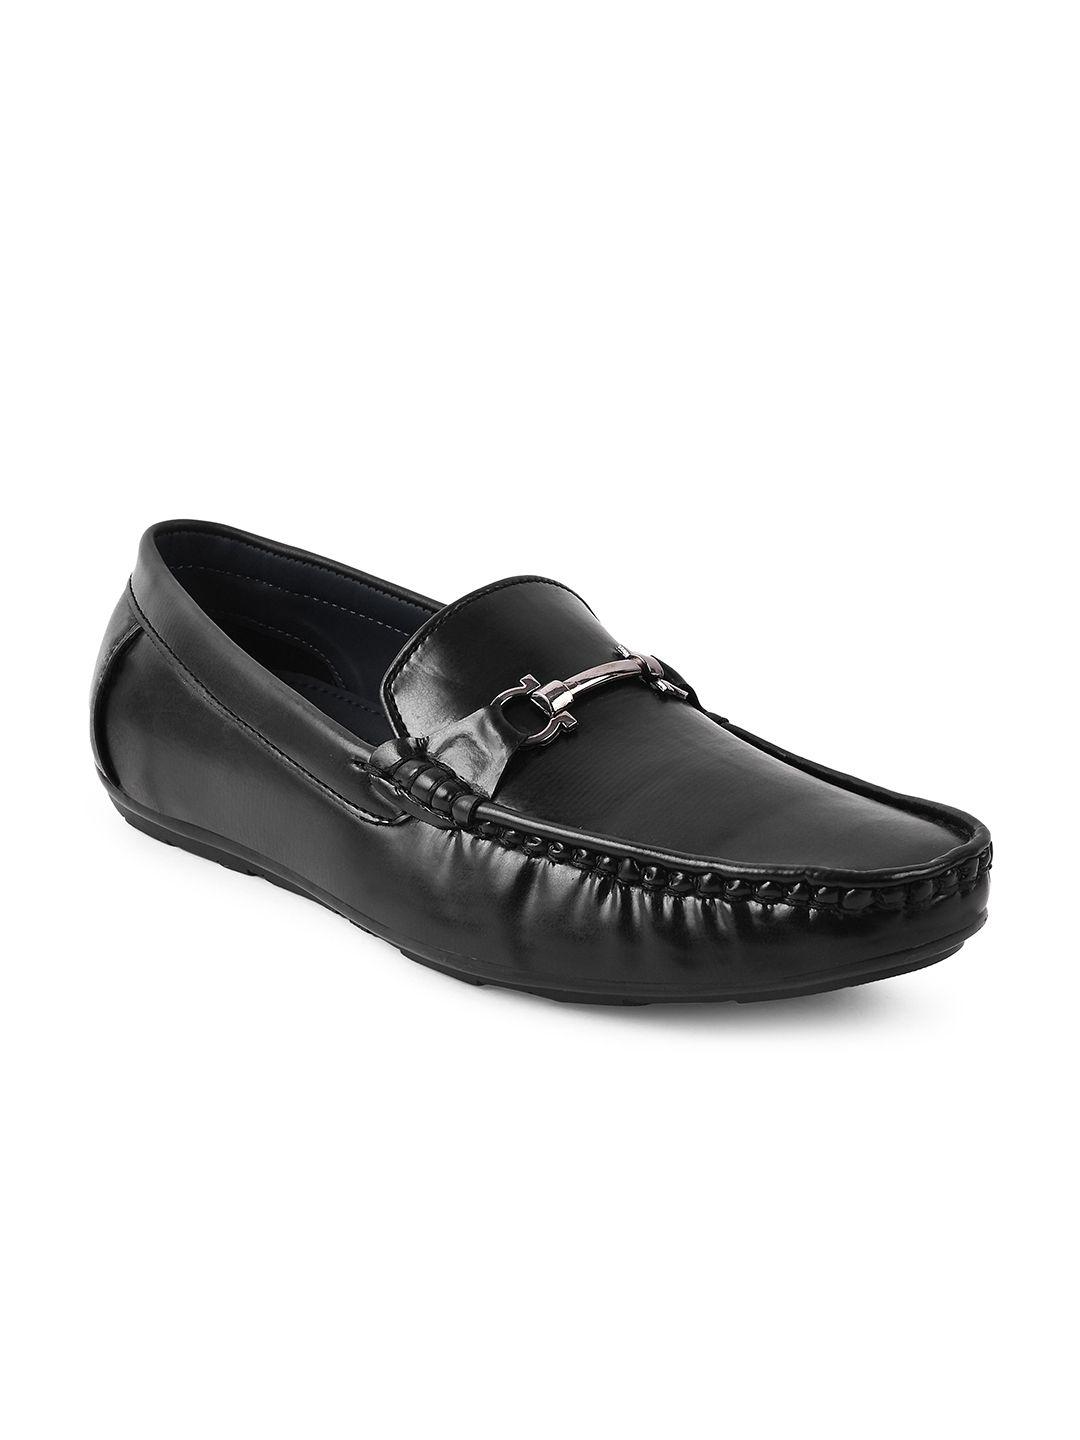 paragon men metal accents round toe formal loafers